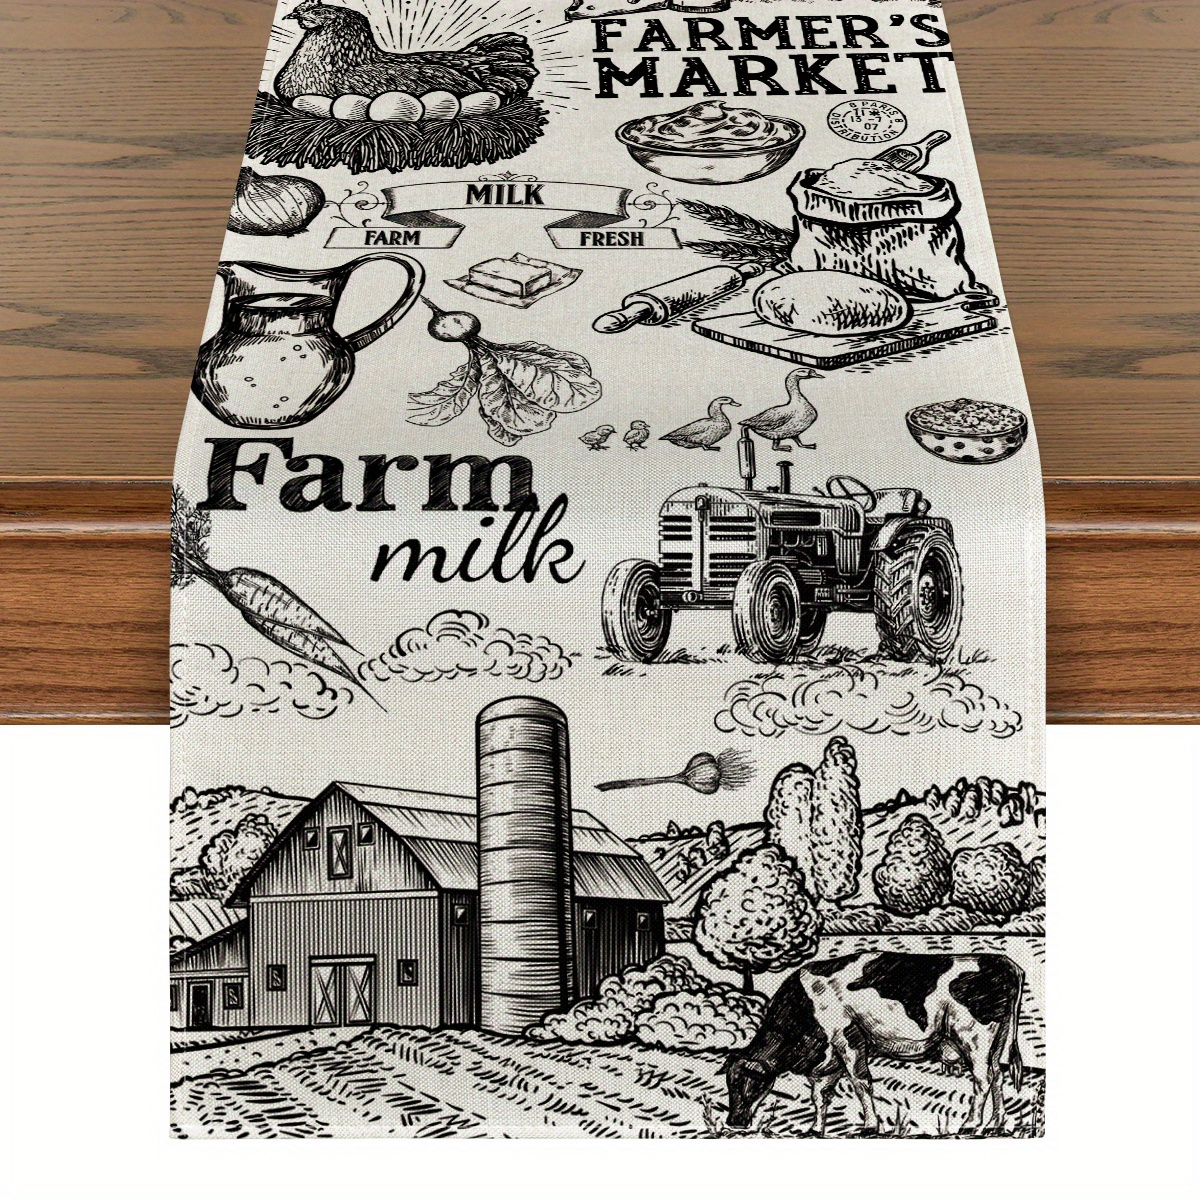 

Sm:)e 1pc Tractor Milk Farm Table Runner 13x72 Inch And Place Mat 12x18 Inch 4pcs, Cow House Fall Kitchen Dining Table Decoration For Outdoor Home Party